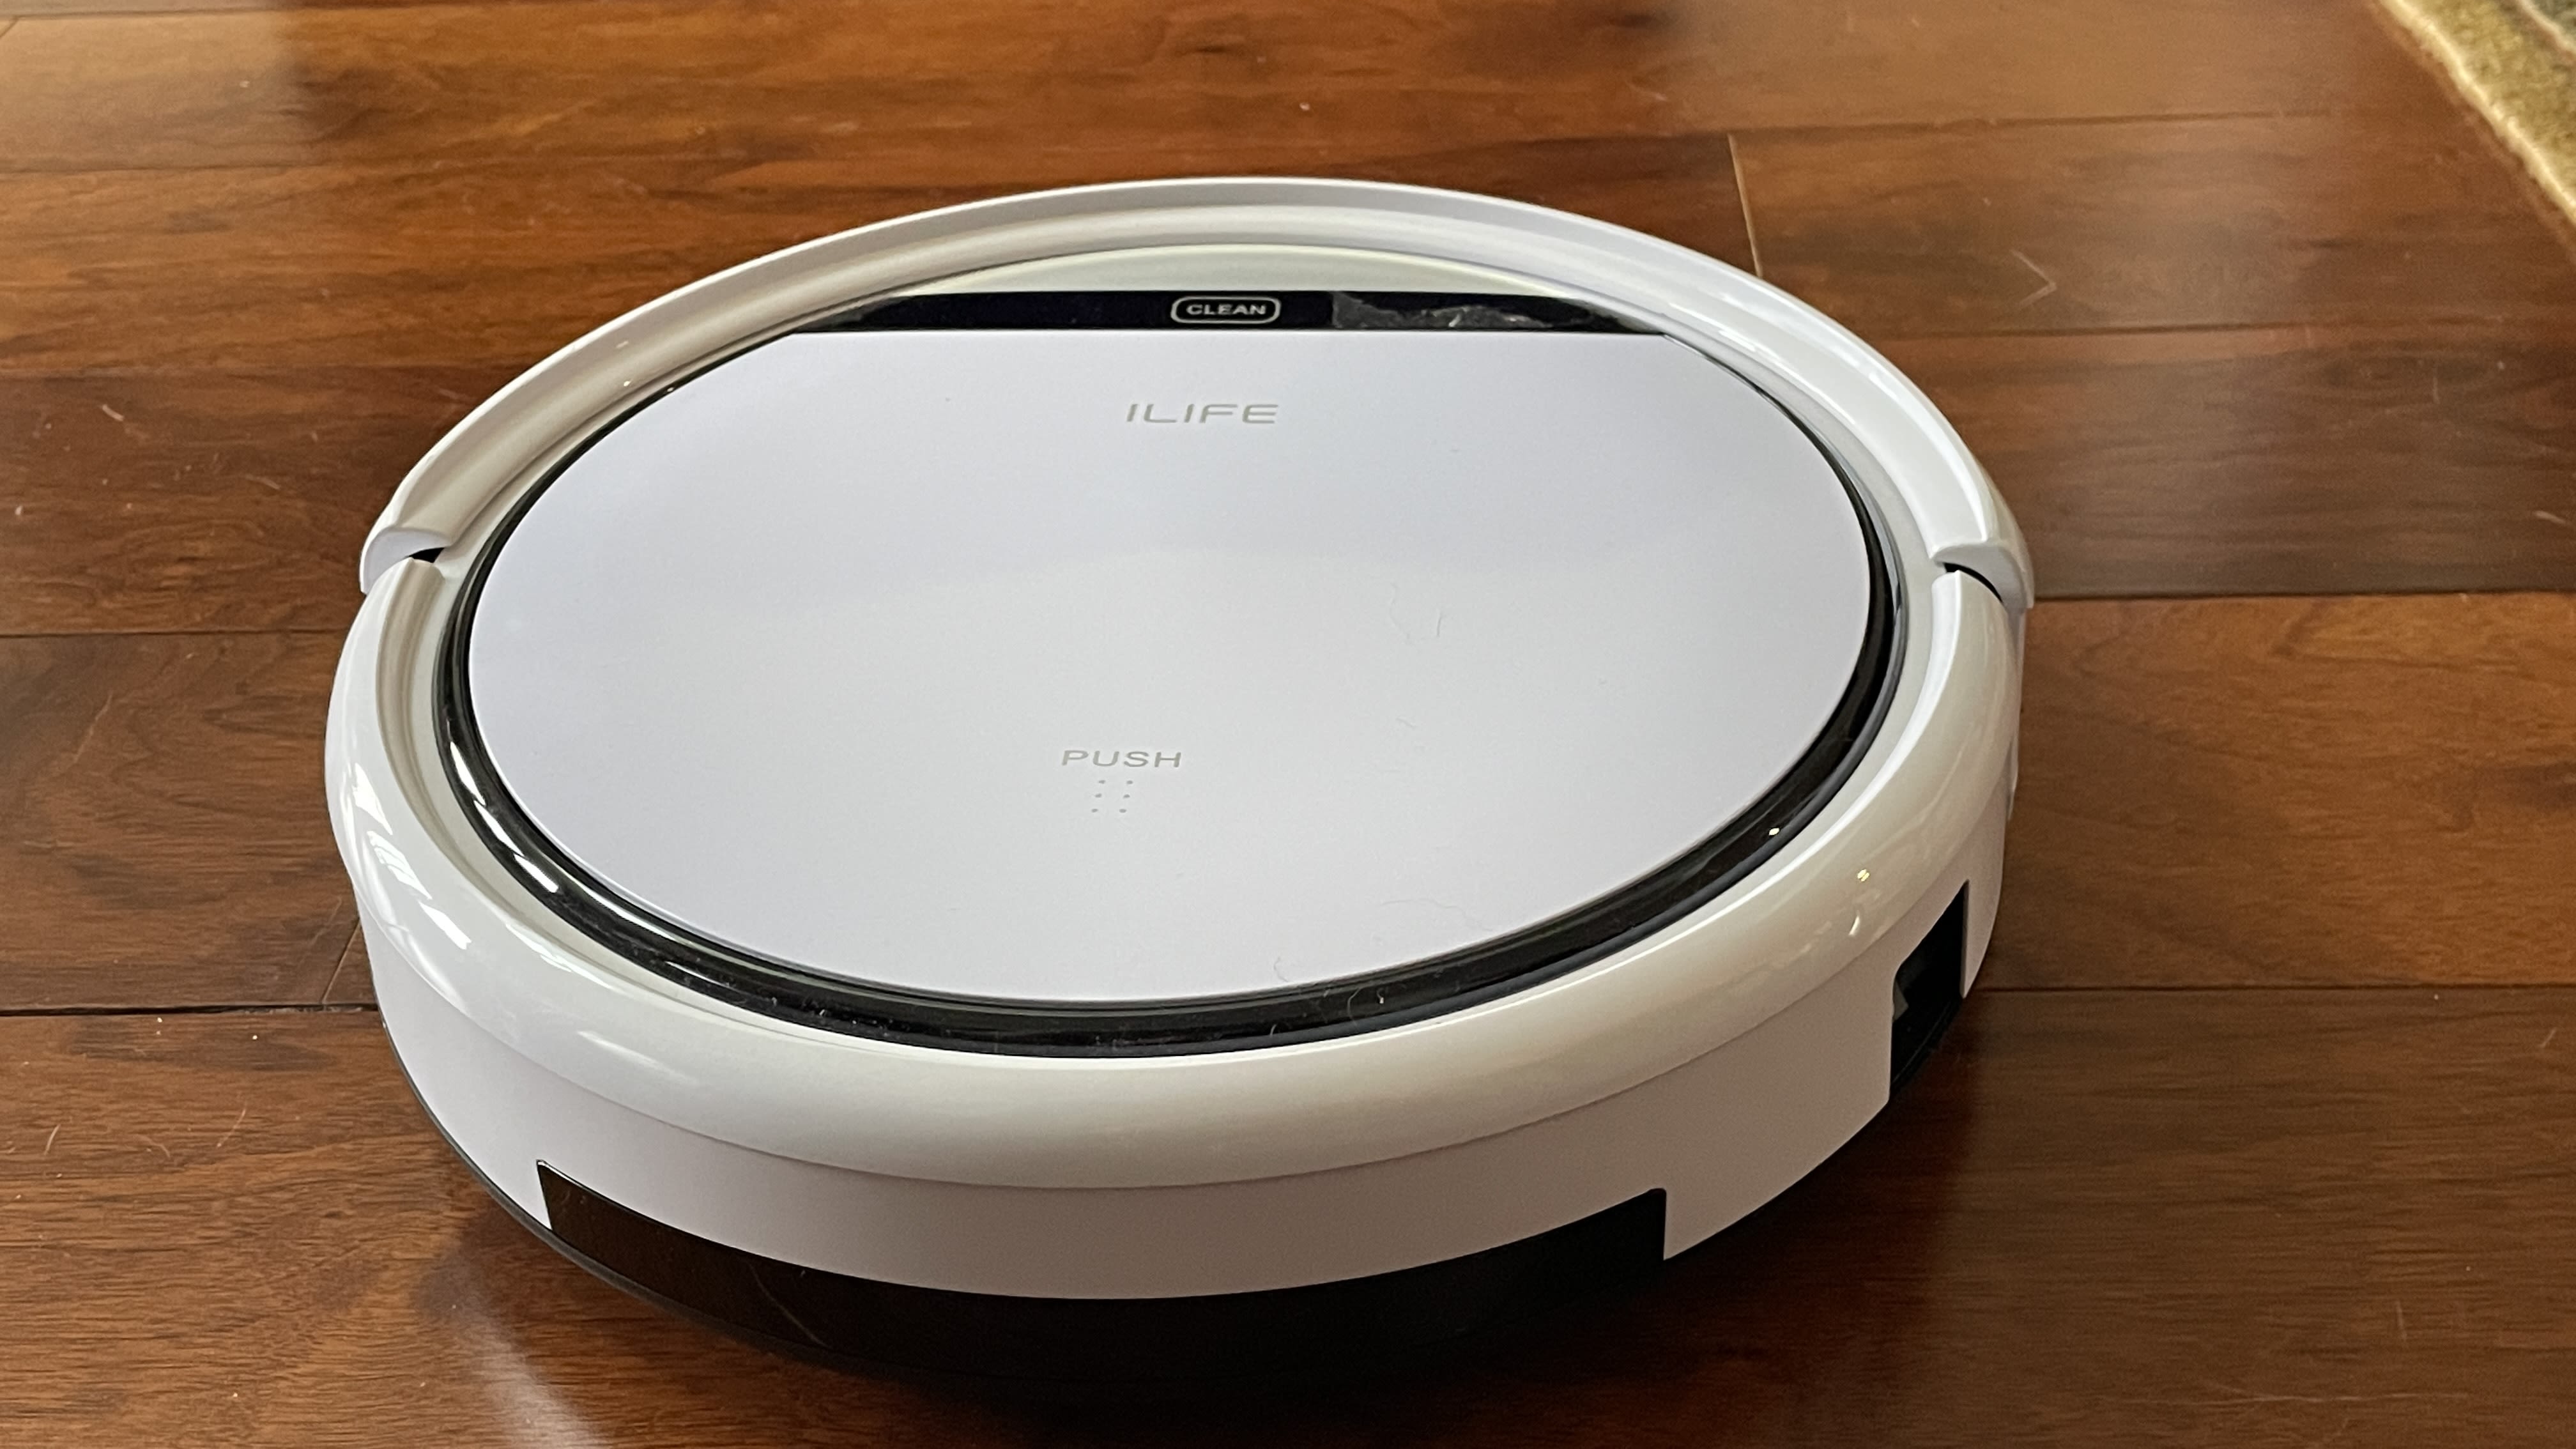 The Best Robot Vacuums Of 2021 Cnn, Are Robot Vacuums Good For Hardwood Floors